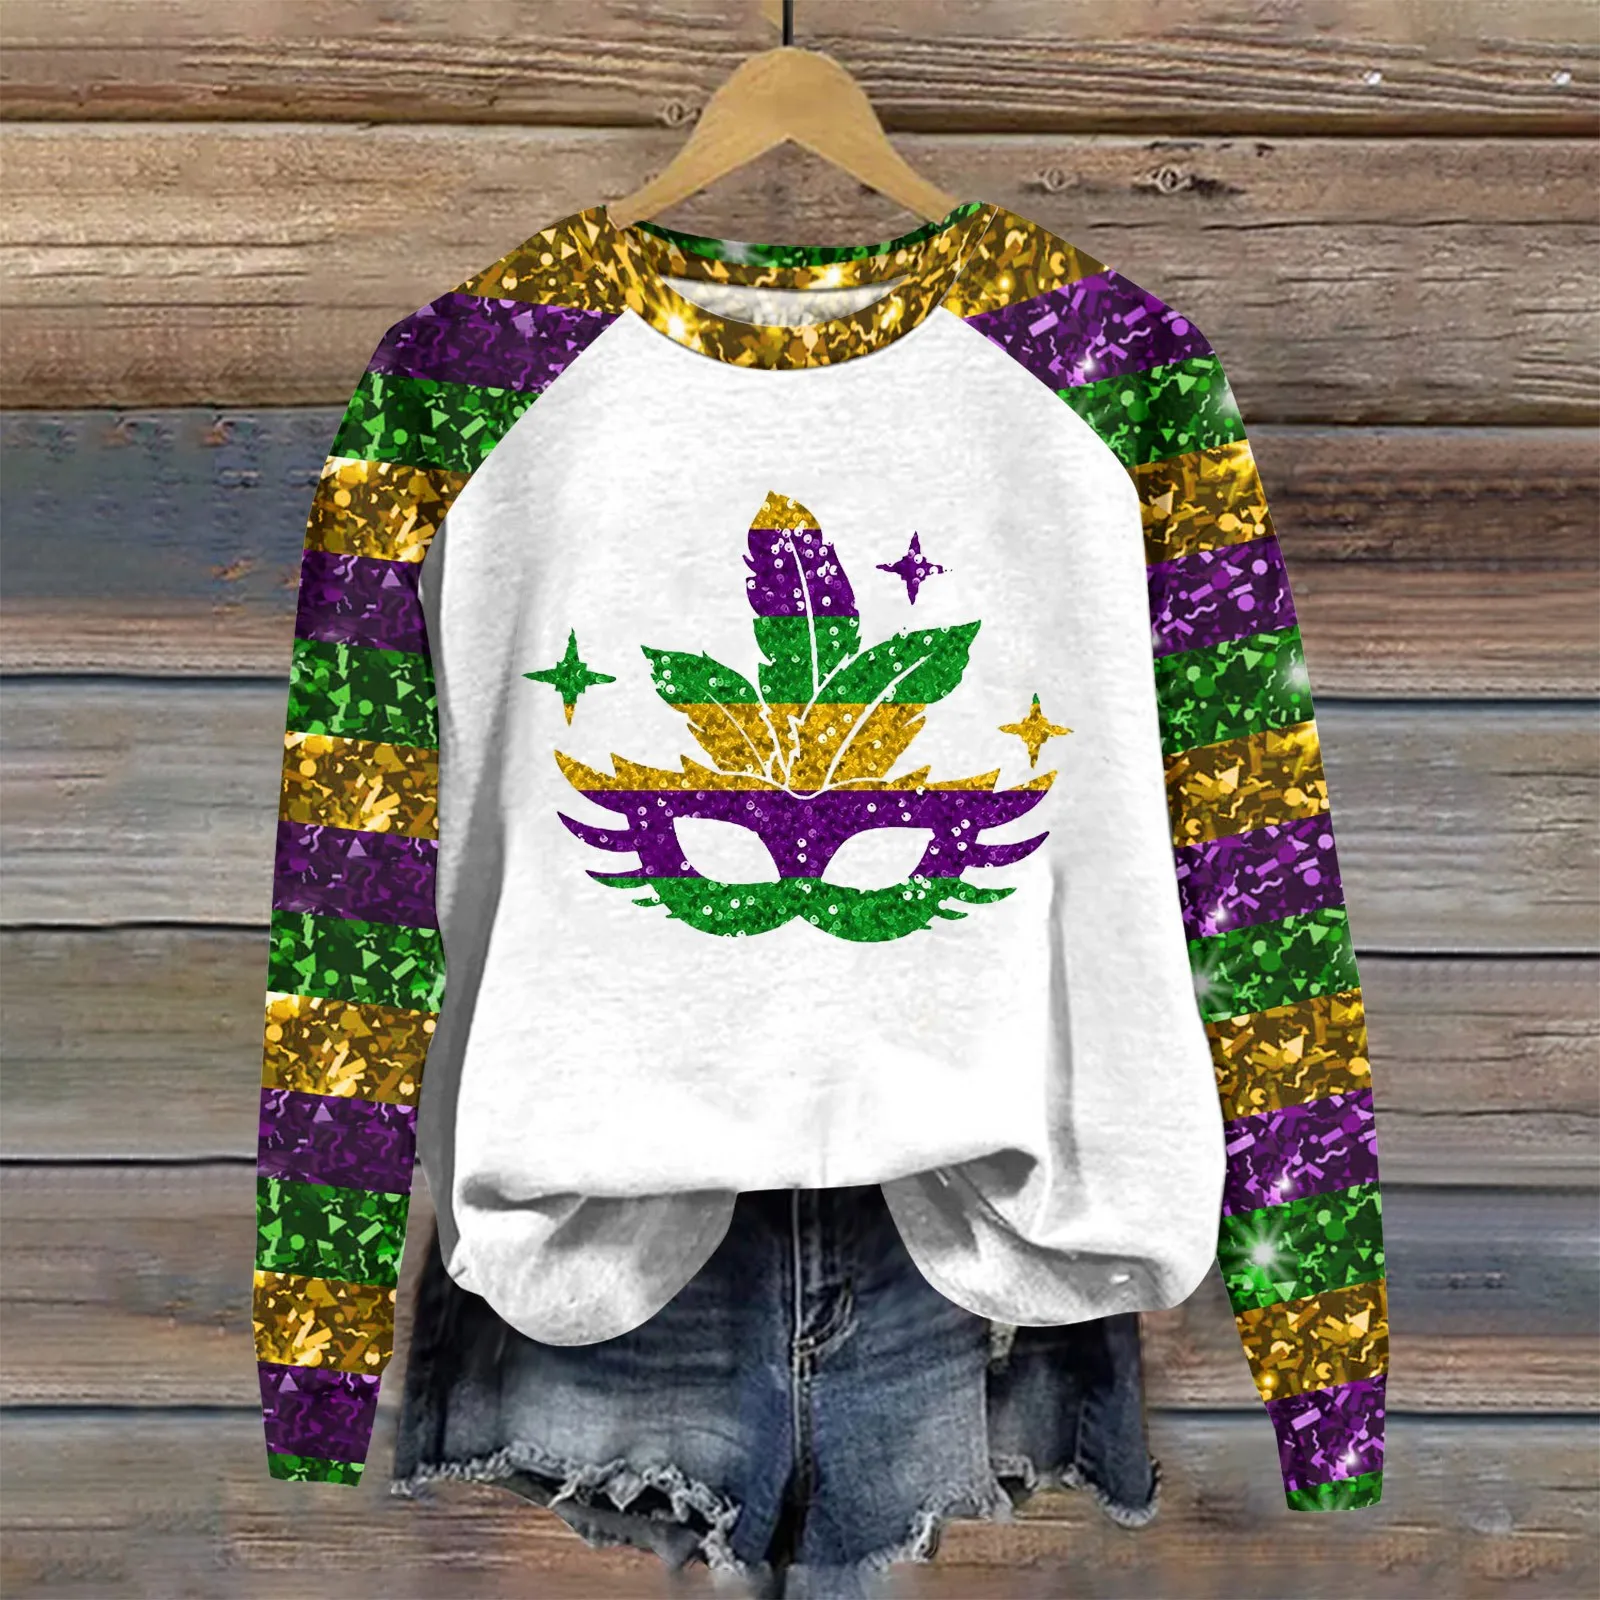 

Fashion Trend Carnival Clothes Women Mask Printed Tops Chic Round Neck Raglan Pullover 3d Sequin Patchwork Cartoon Pattern Tops